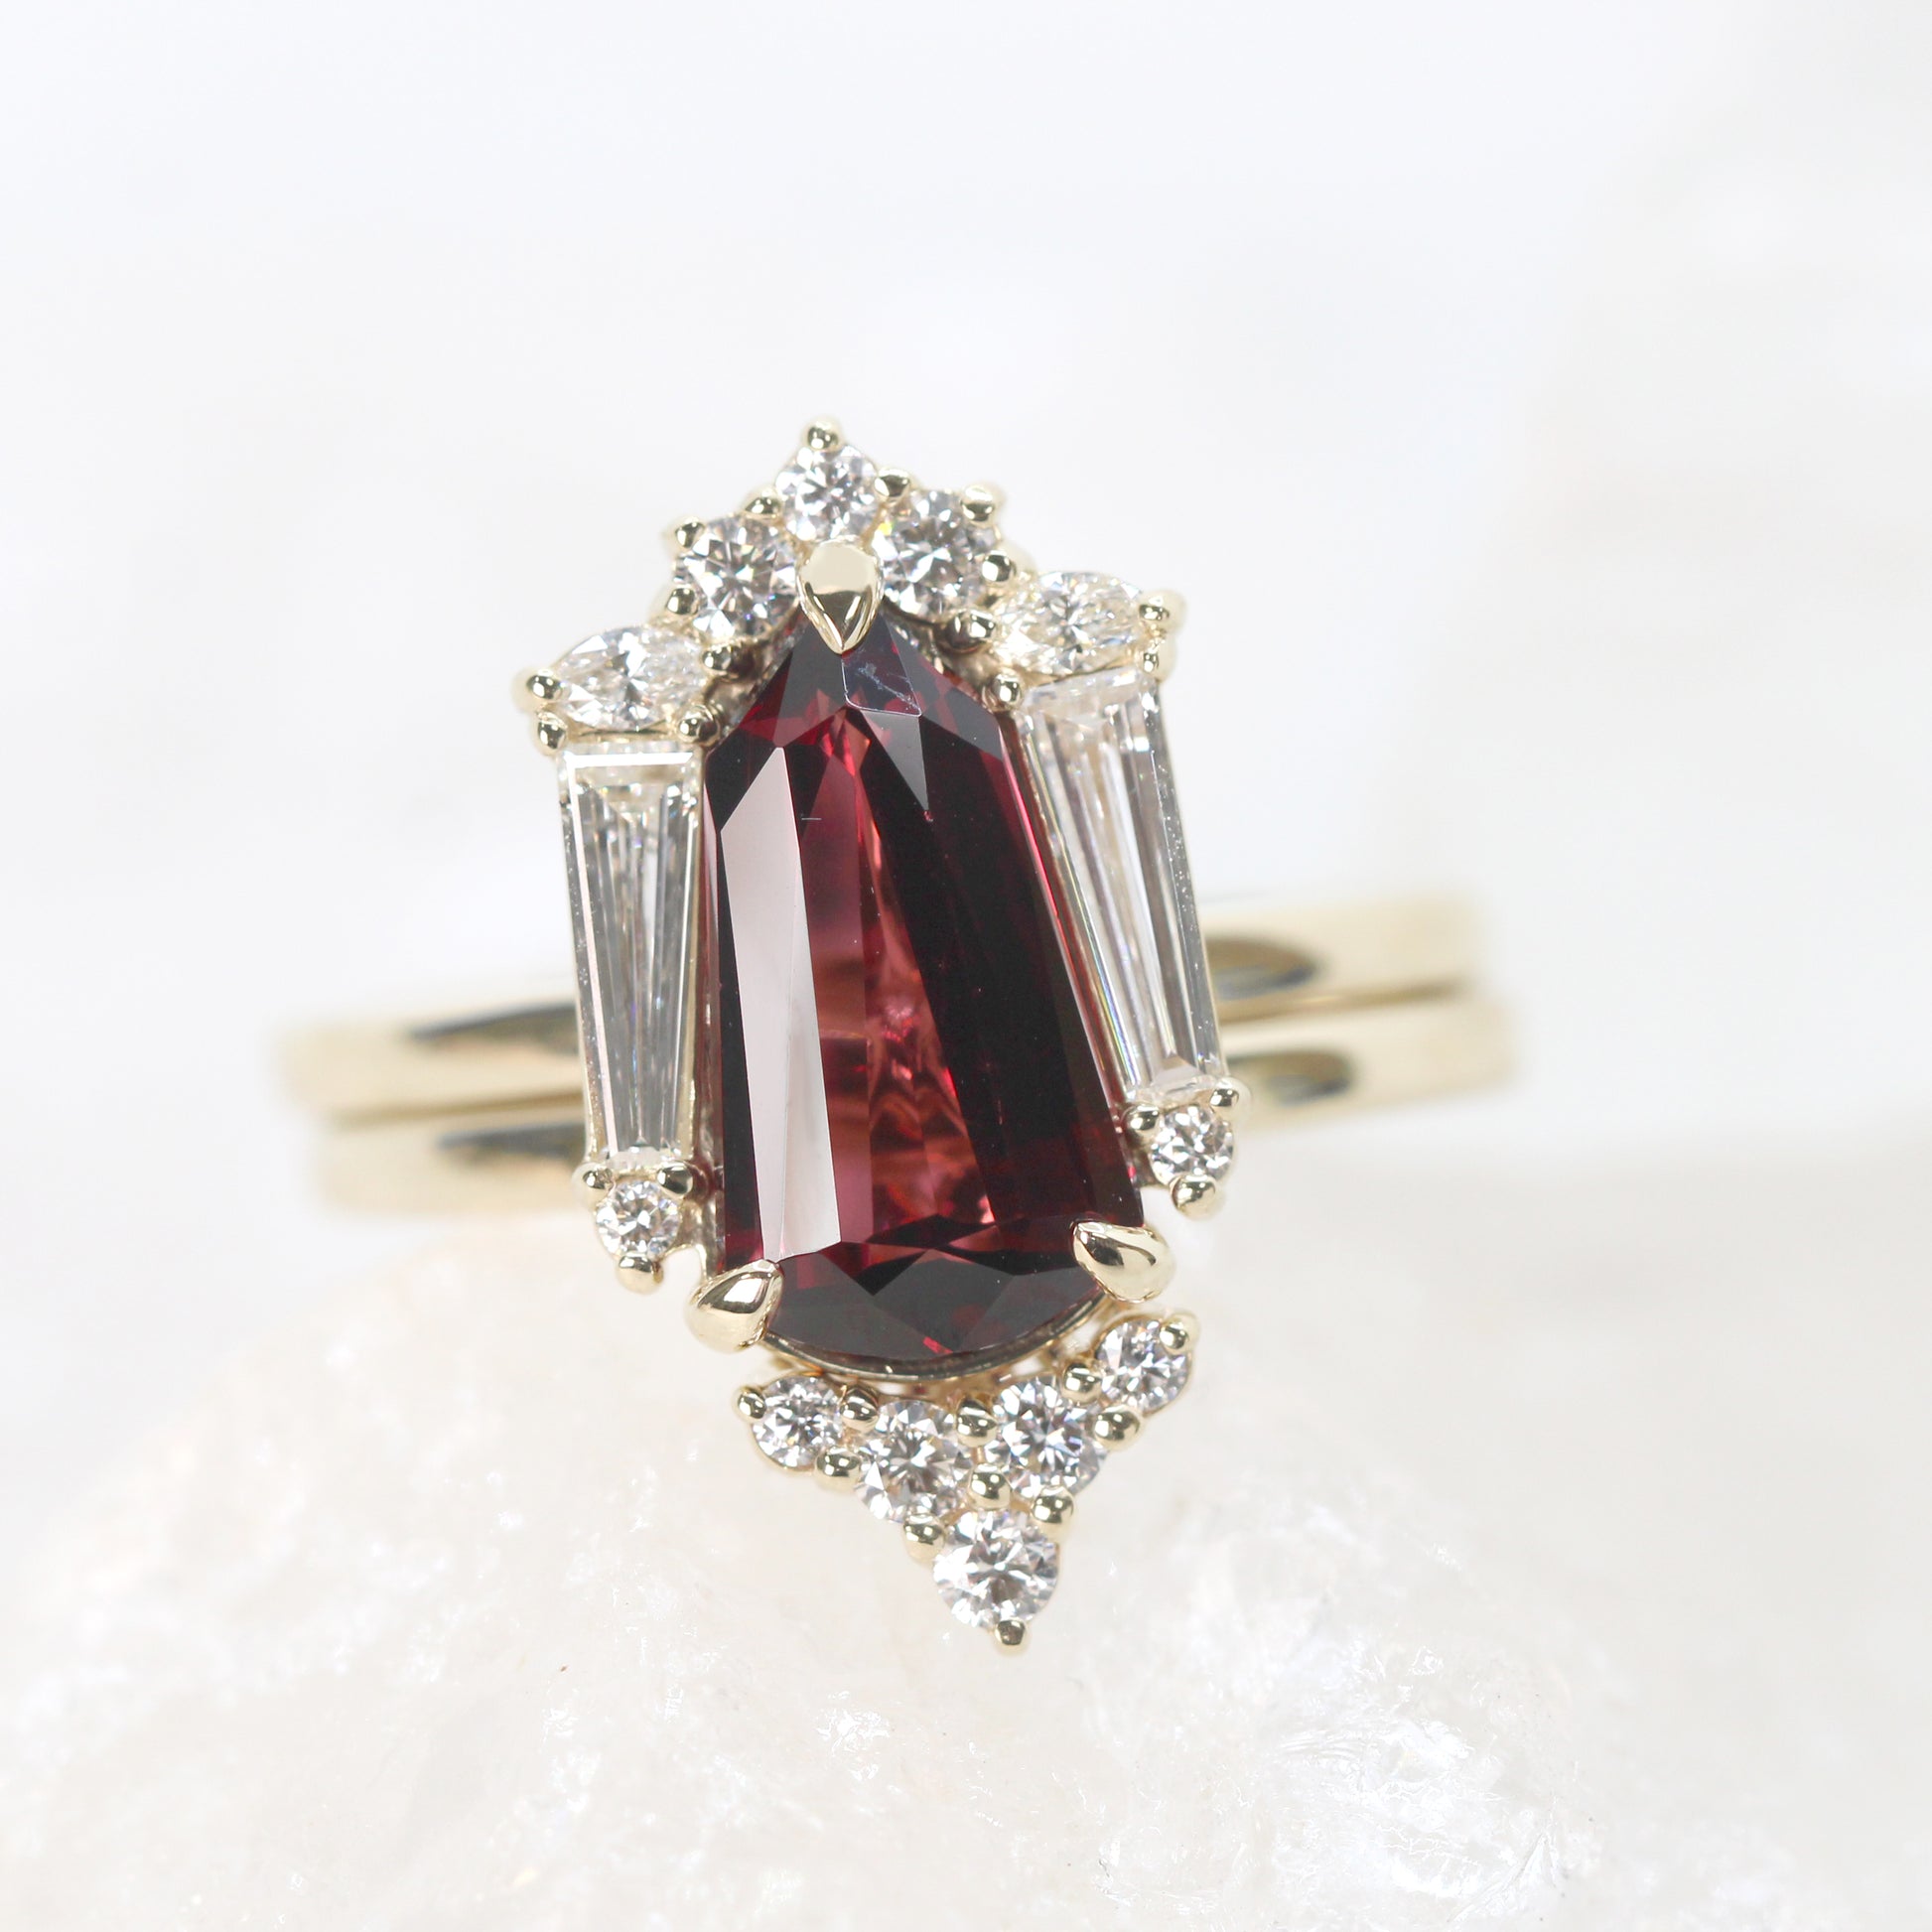 Christine Ring with a 2.68 Carat Shield Garnet and White Accent Diamonds in 14k Yellow Gold with Matching Band - Ready to Size and Ship - Midwinter Co. Alternative Bridal Rings and Modern Fine Jewelry